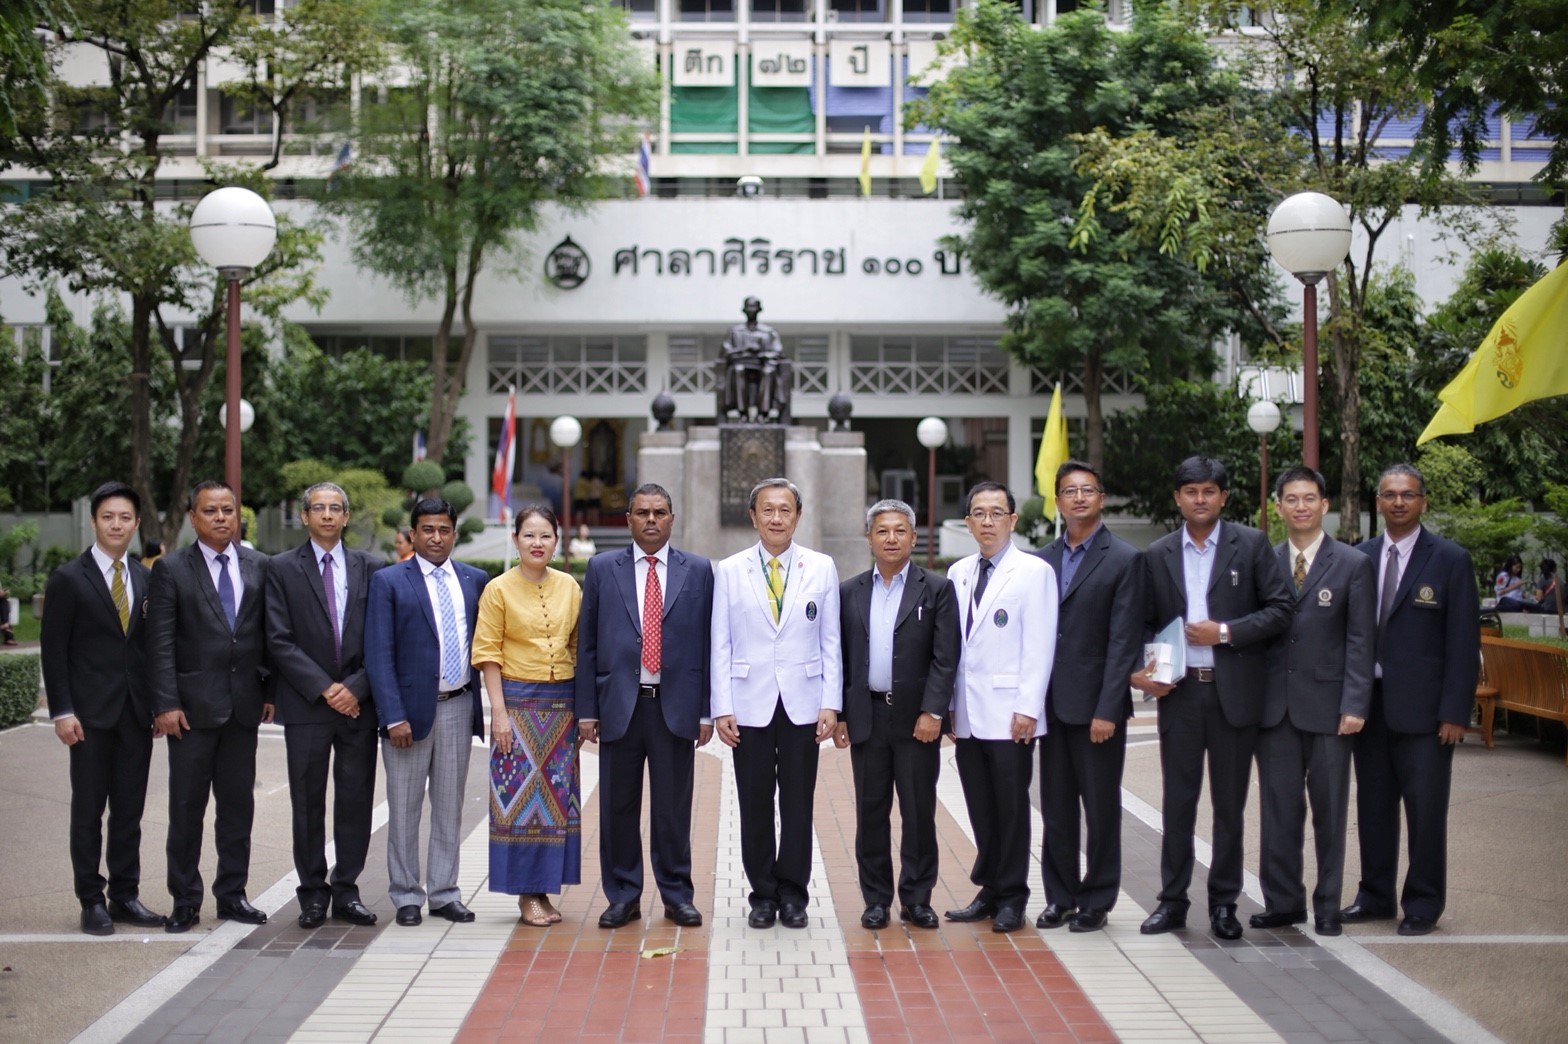 Deputy Prime Minister and Minister of Health and Population, Nepal Visits Siriraj